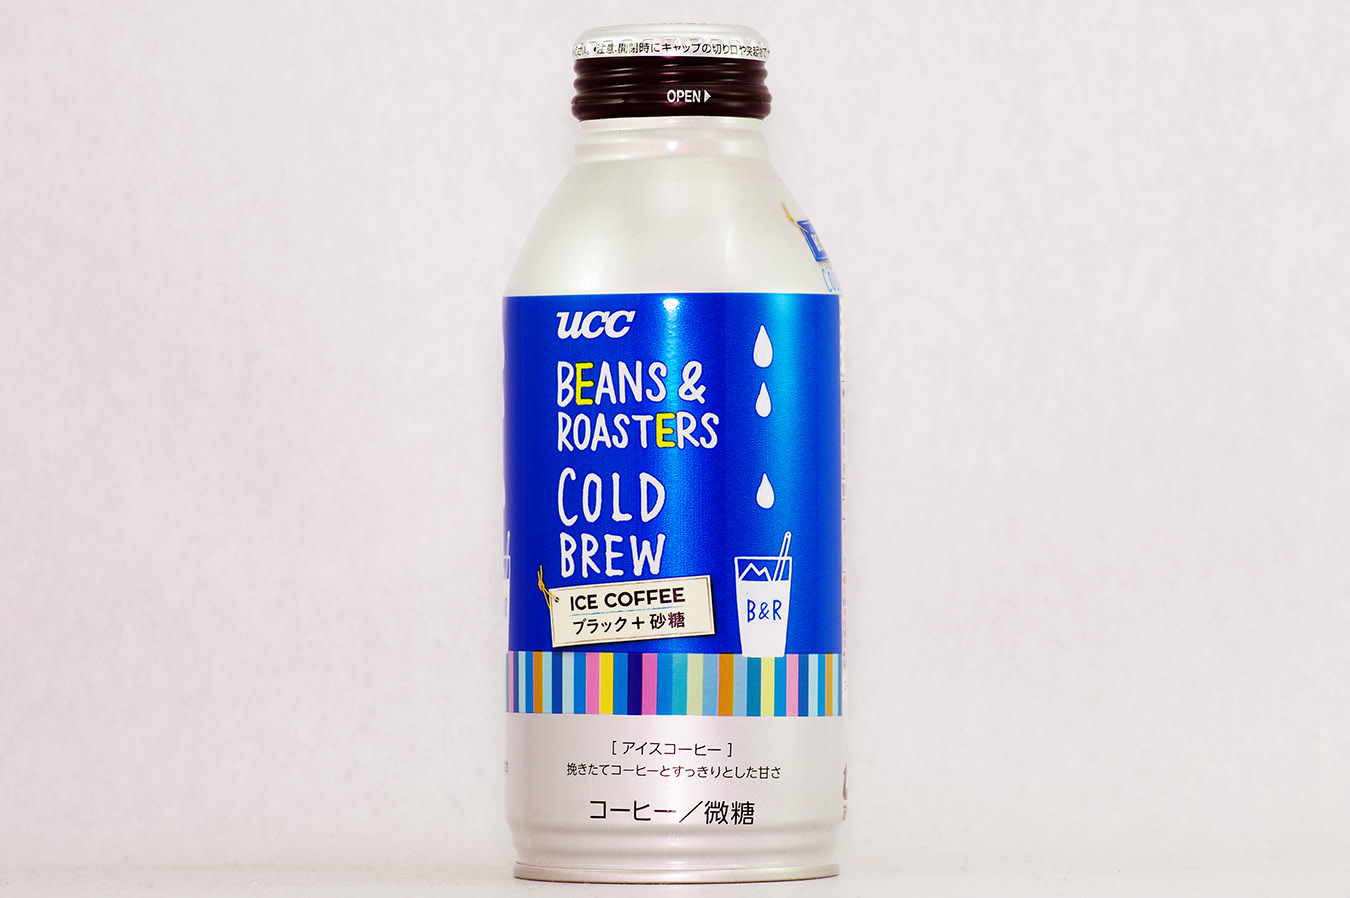 UCC BEANS & ROASTERS COLD BREW 375g缶 2016年4月